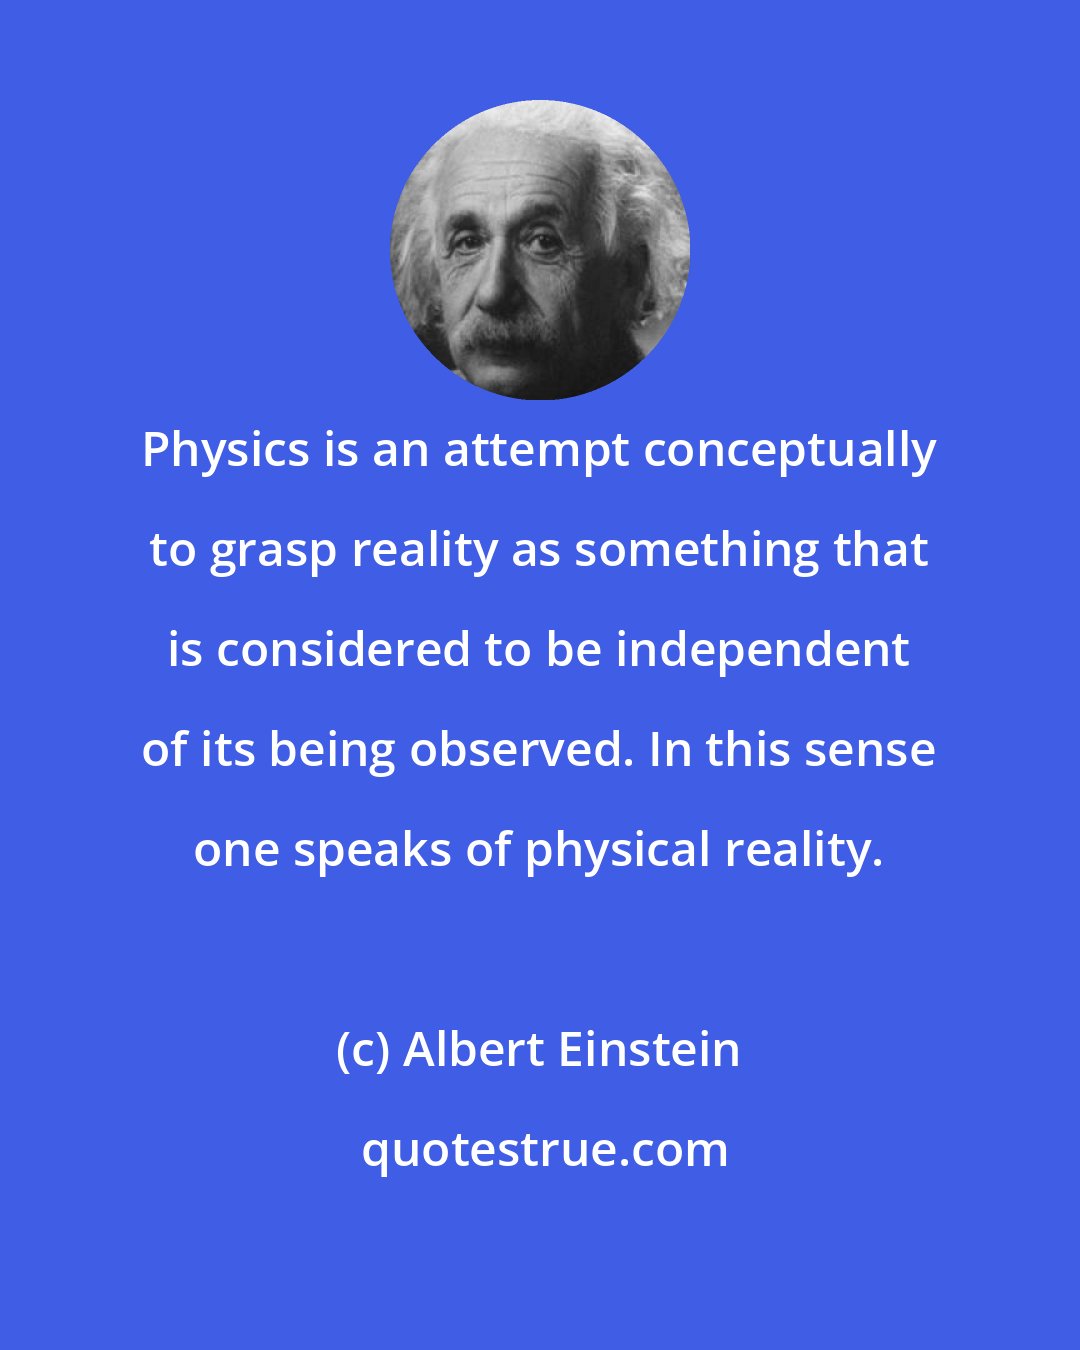 Albert Einstein: Physics is an attempt conceptually to grasp reality as something that is considered to be independent of its being observed. In this sense one speaks of physical reality.